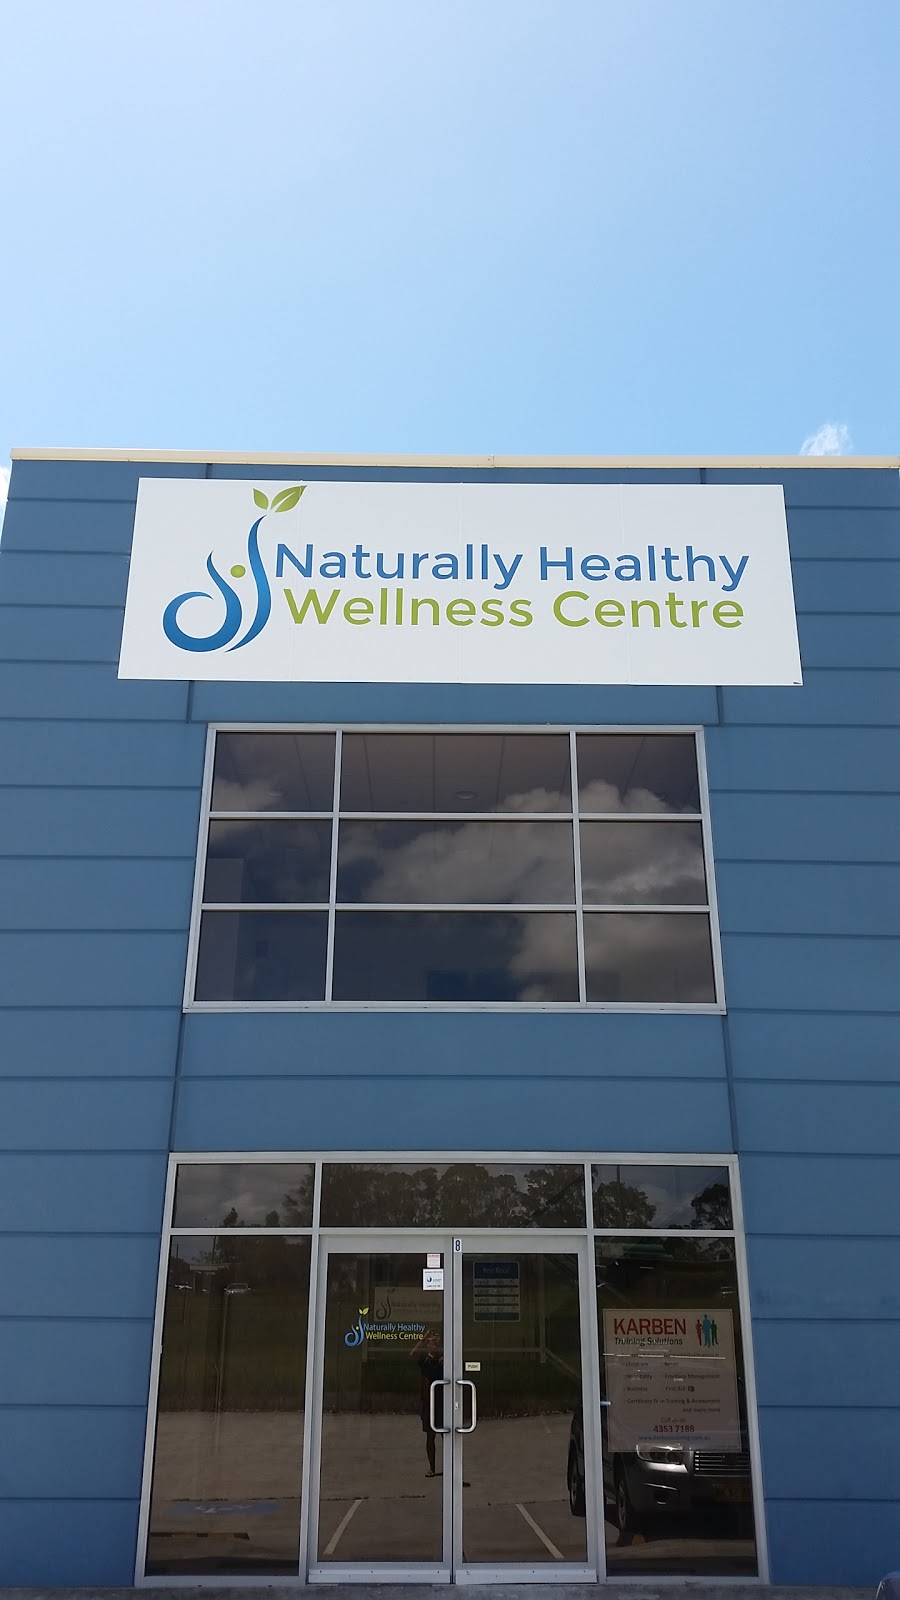 Optimum Health & Performance | physiotherapist | Unit 9B/1-10 Amy Cl, Wyong NSW 2259, Australia | 0243523343 OR +61 2 4352 3343